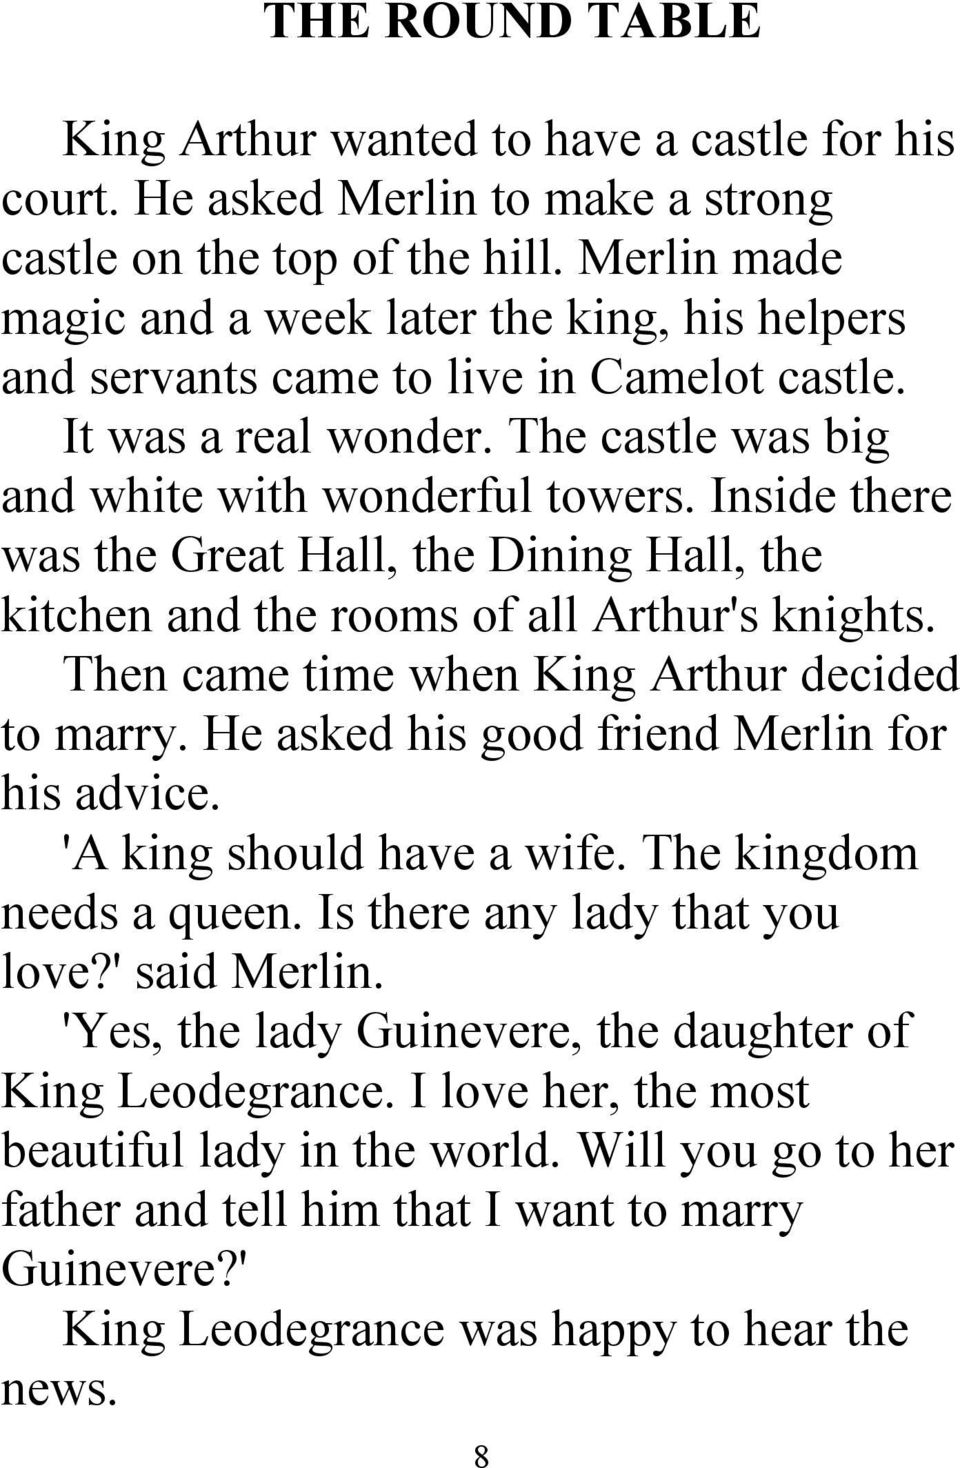 Inside there was the Great Hall, the Dining Hall, the kitchen and the rooms of all Arthur's knights. Then came time when King Arthur decided to marry. He asked his good friend Merlin for his advice.